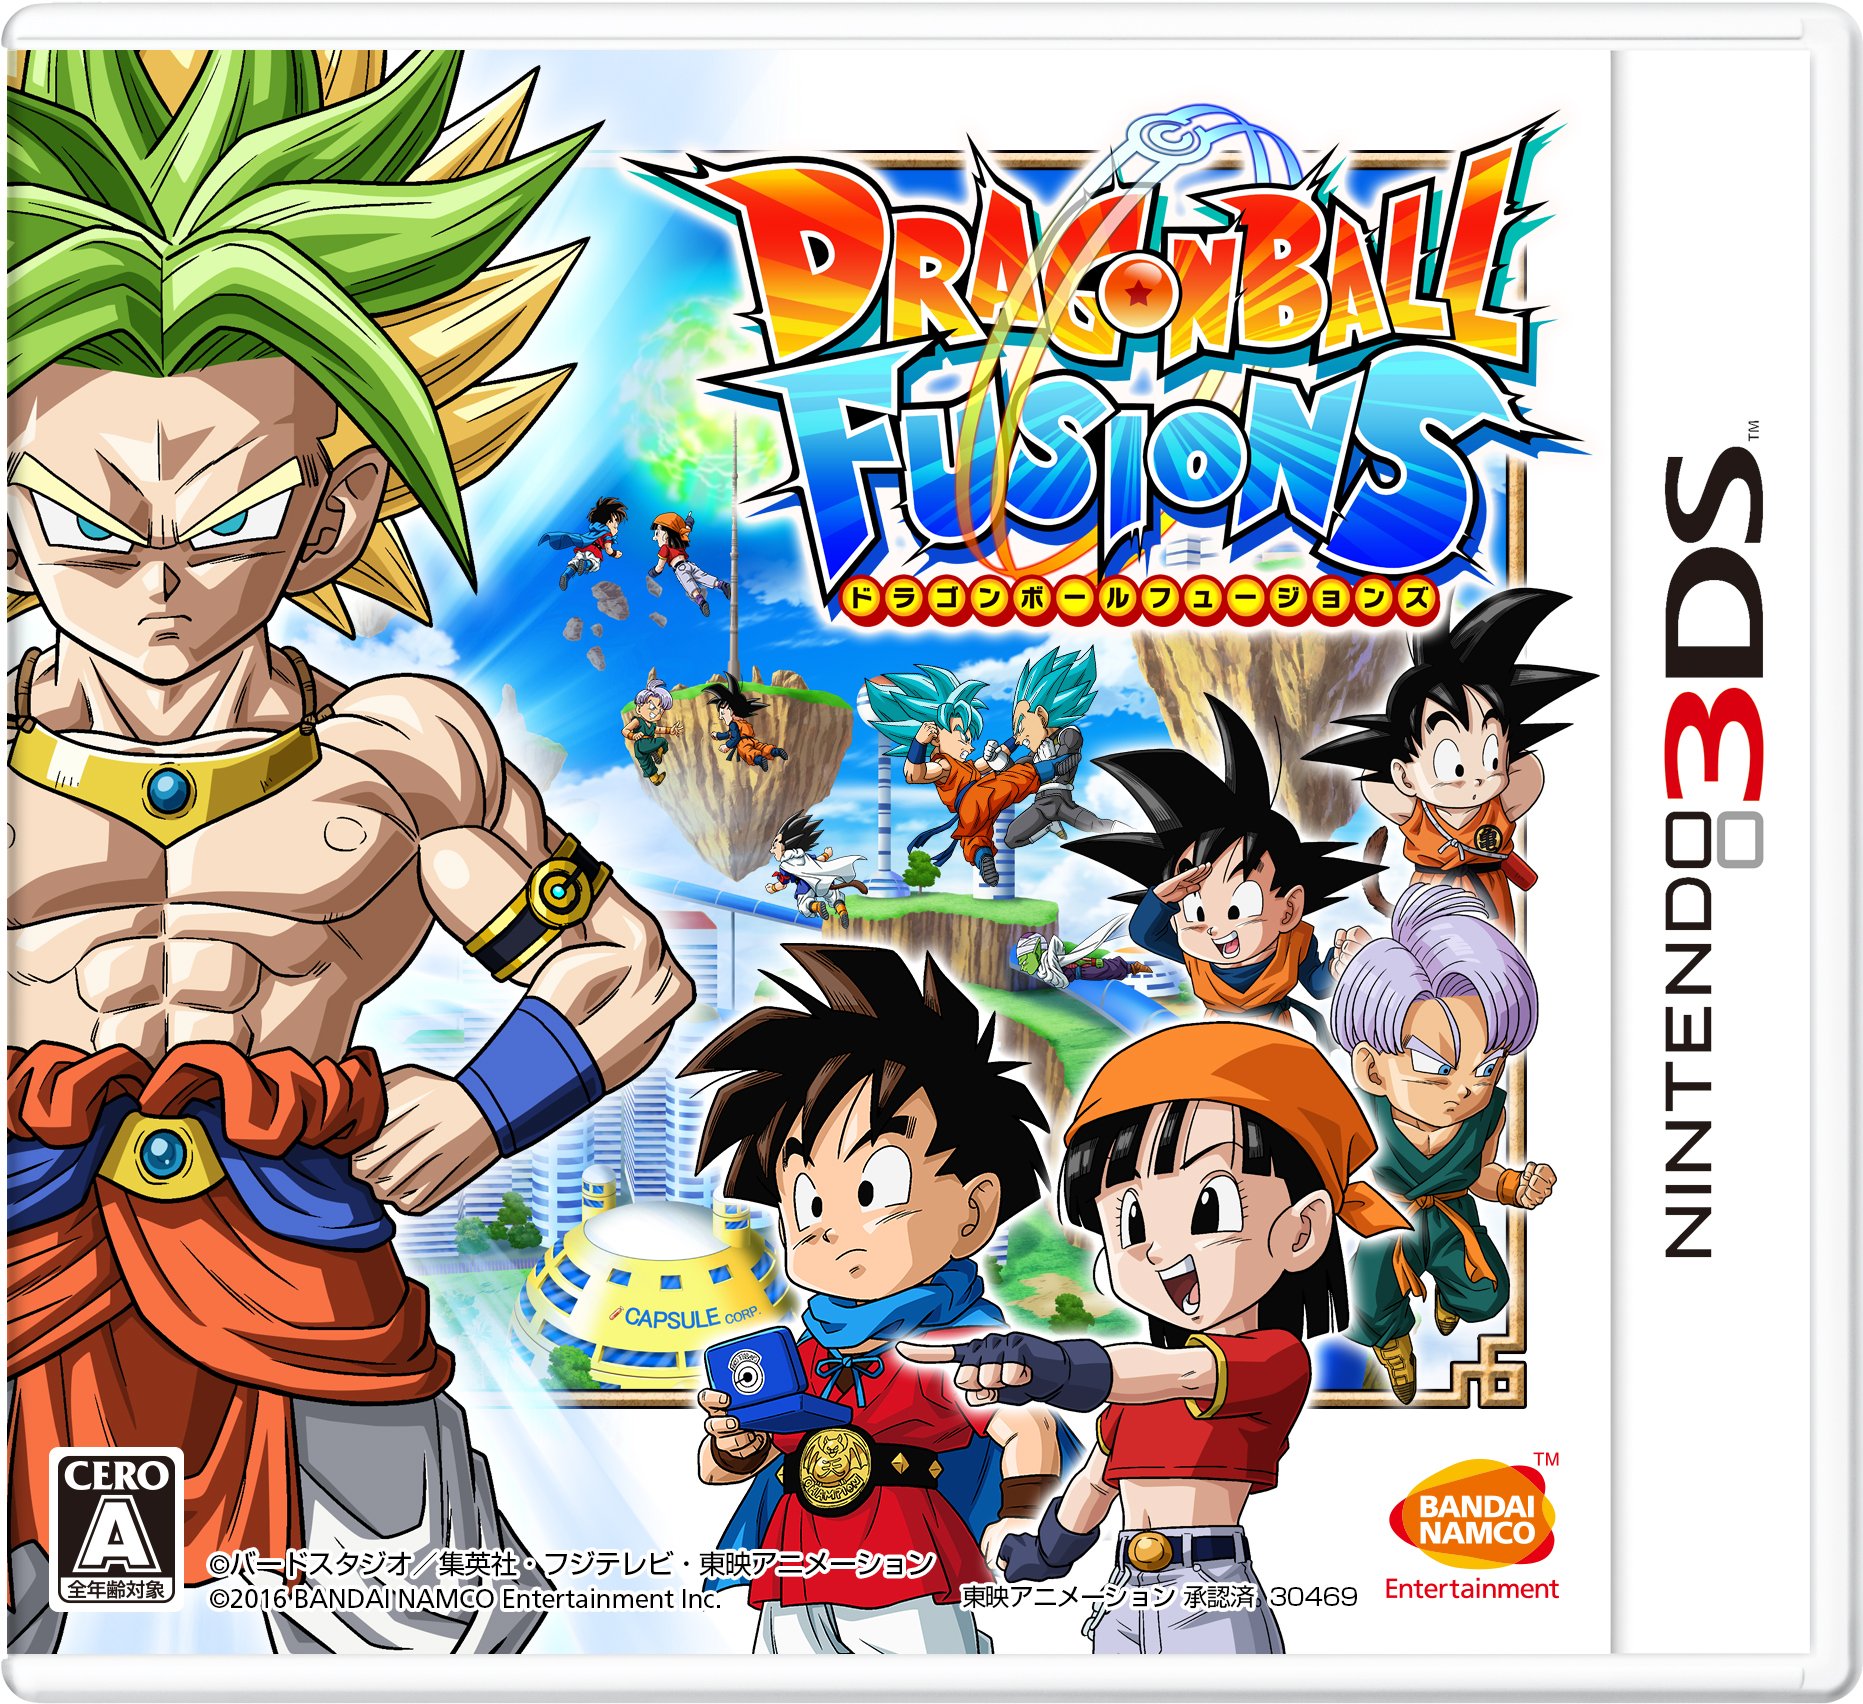 Dragon Ball Fusion's [Japan Import][Region Locked / Not Compatible with North American Nintendo 3ds] [Japan] [Nintendo 3ds]